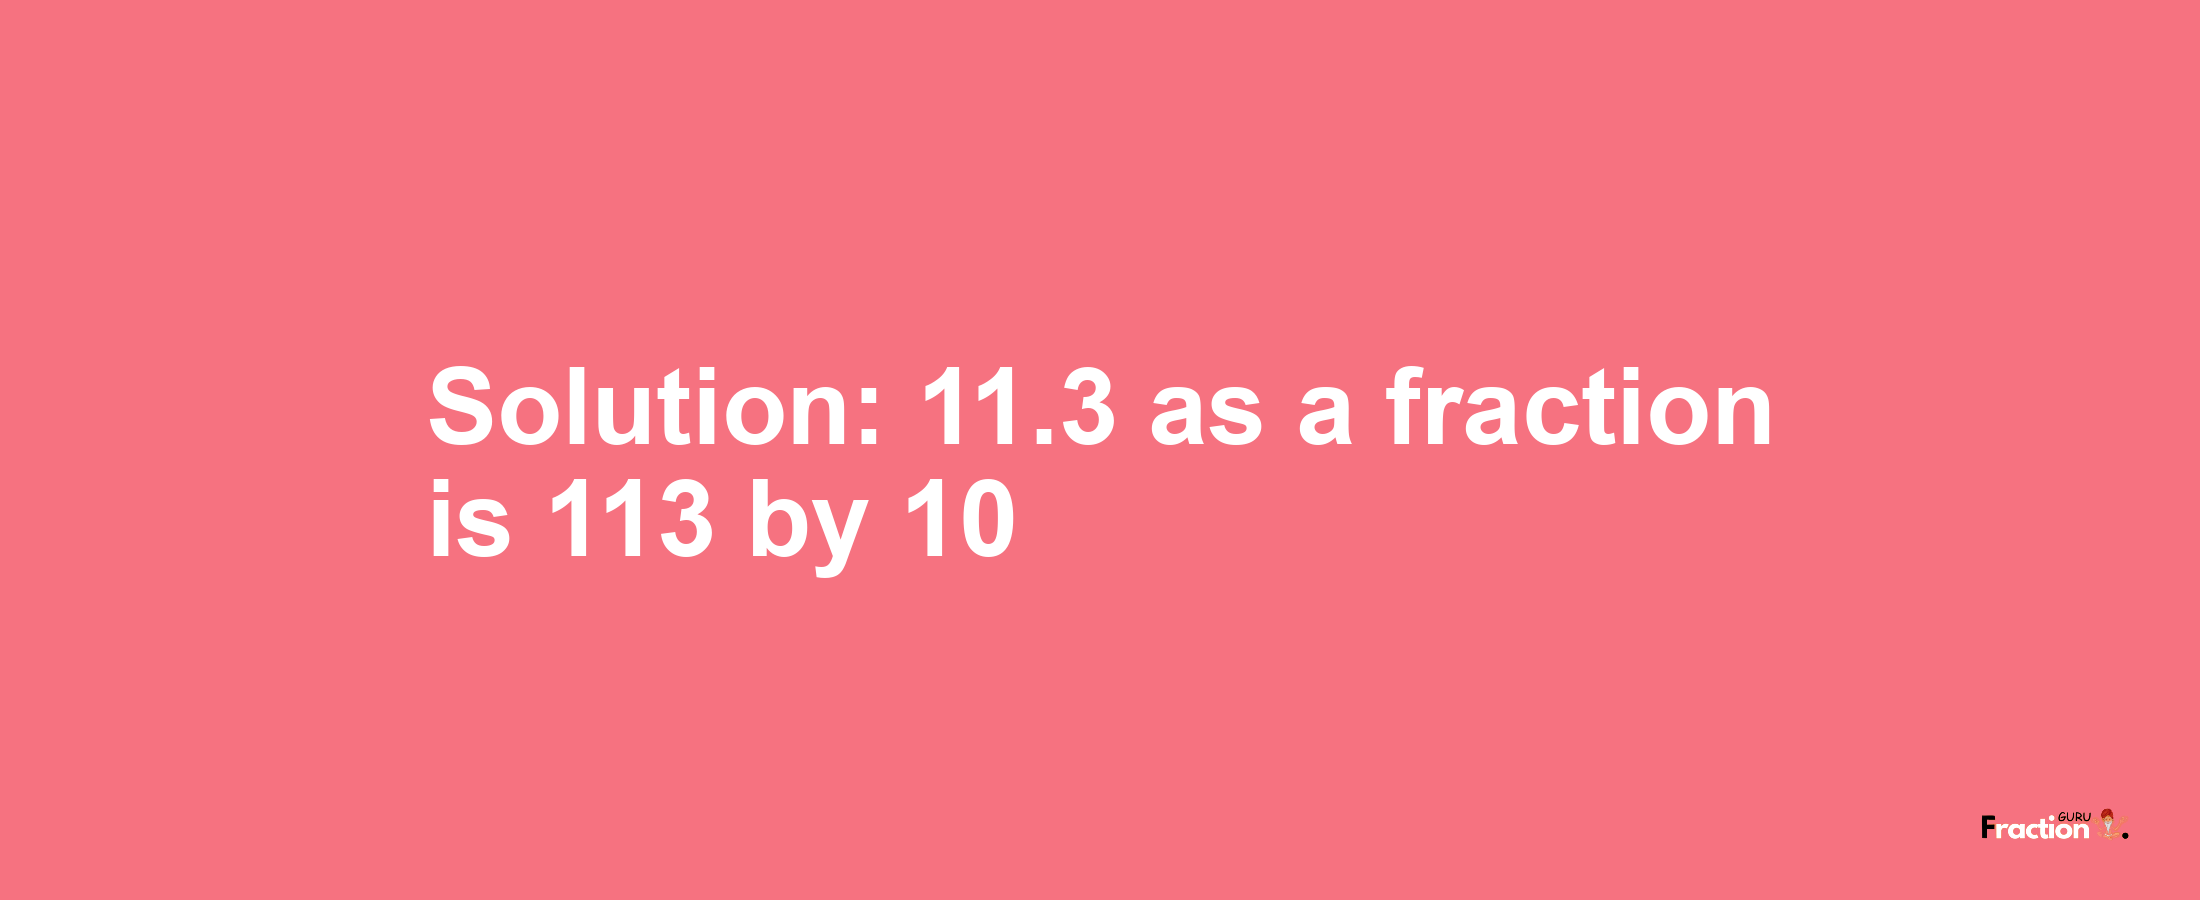 Solution:11.3 as a fraction is 113/10